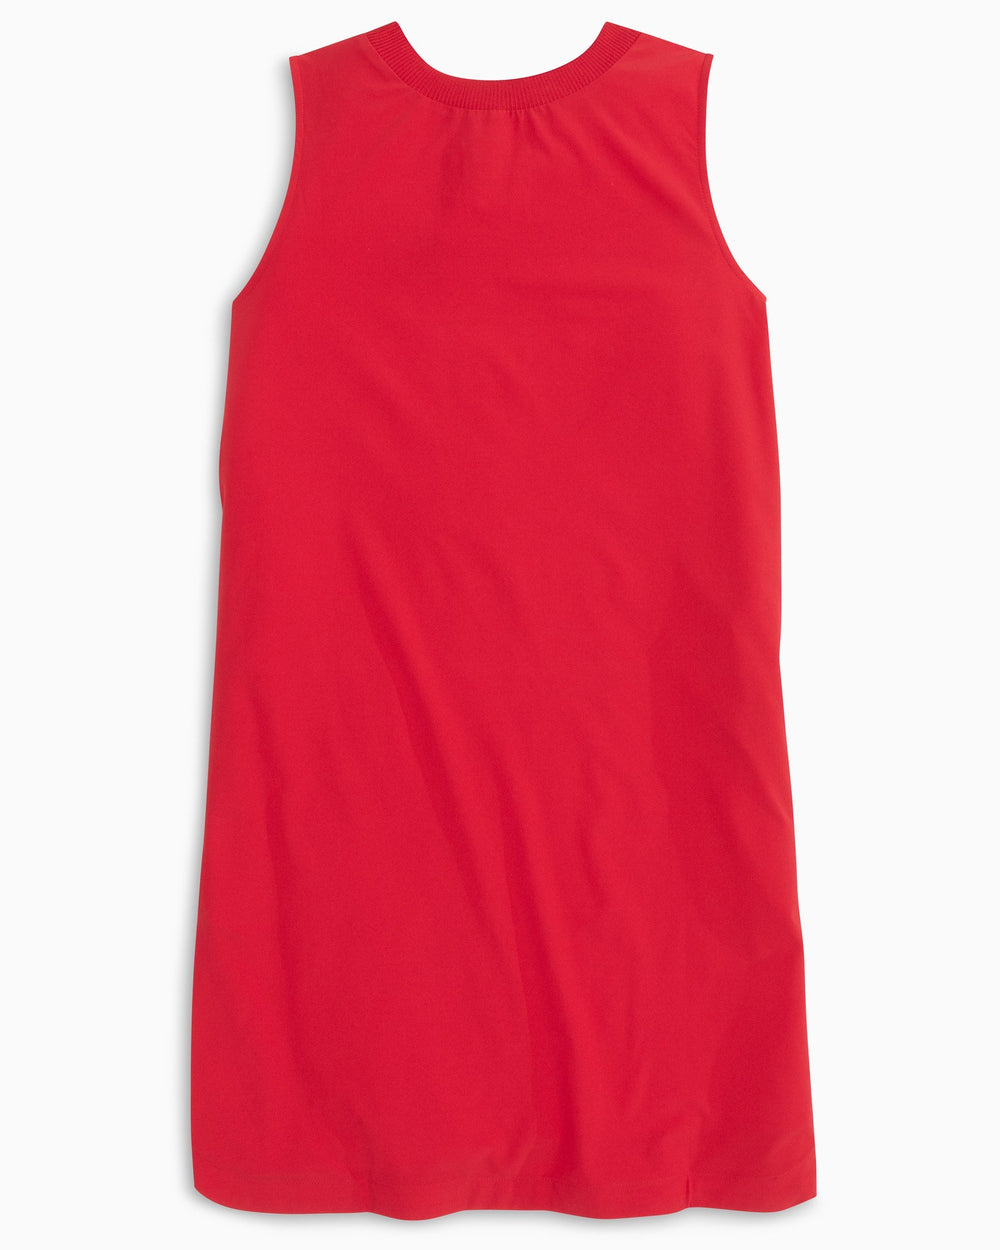 The back view of the Women's Red Gameday Dress by Southern Tide - Varsity Red